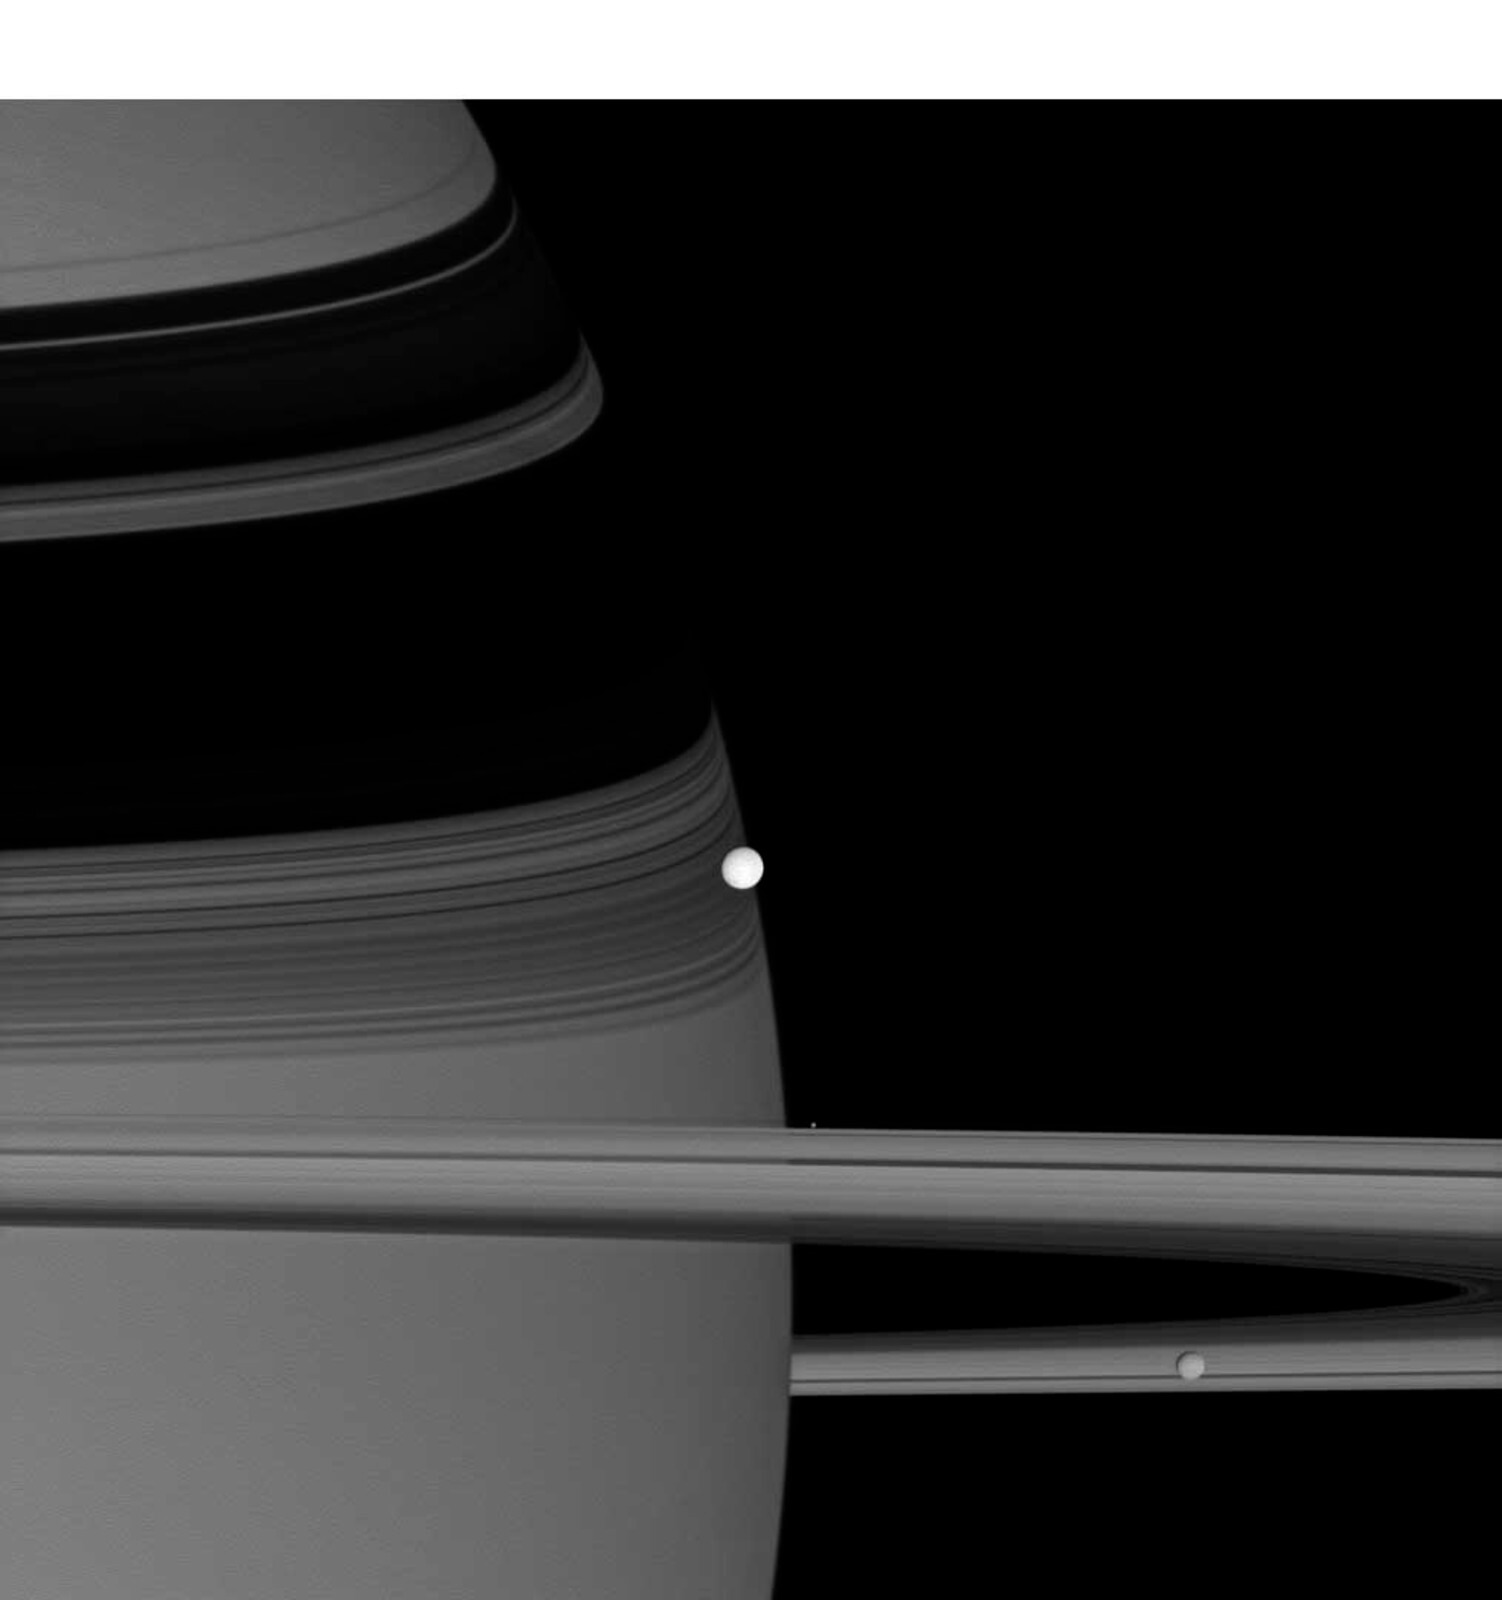 NASA’s Cassini spacecraft captured this image of reflective Enceladus, seen at center, as it orbits Saturn